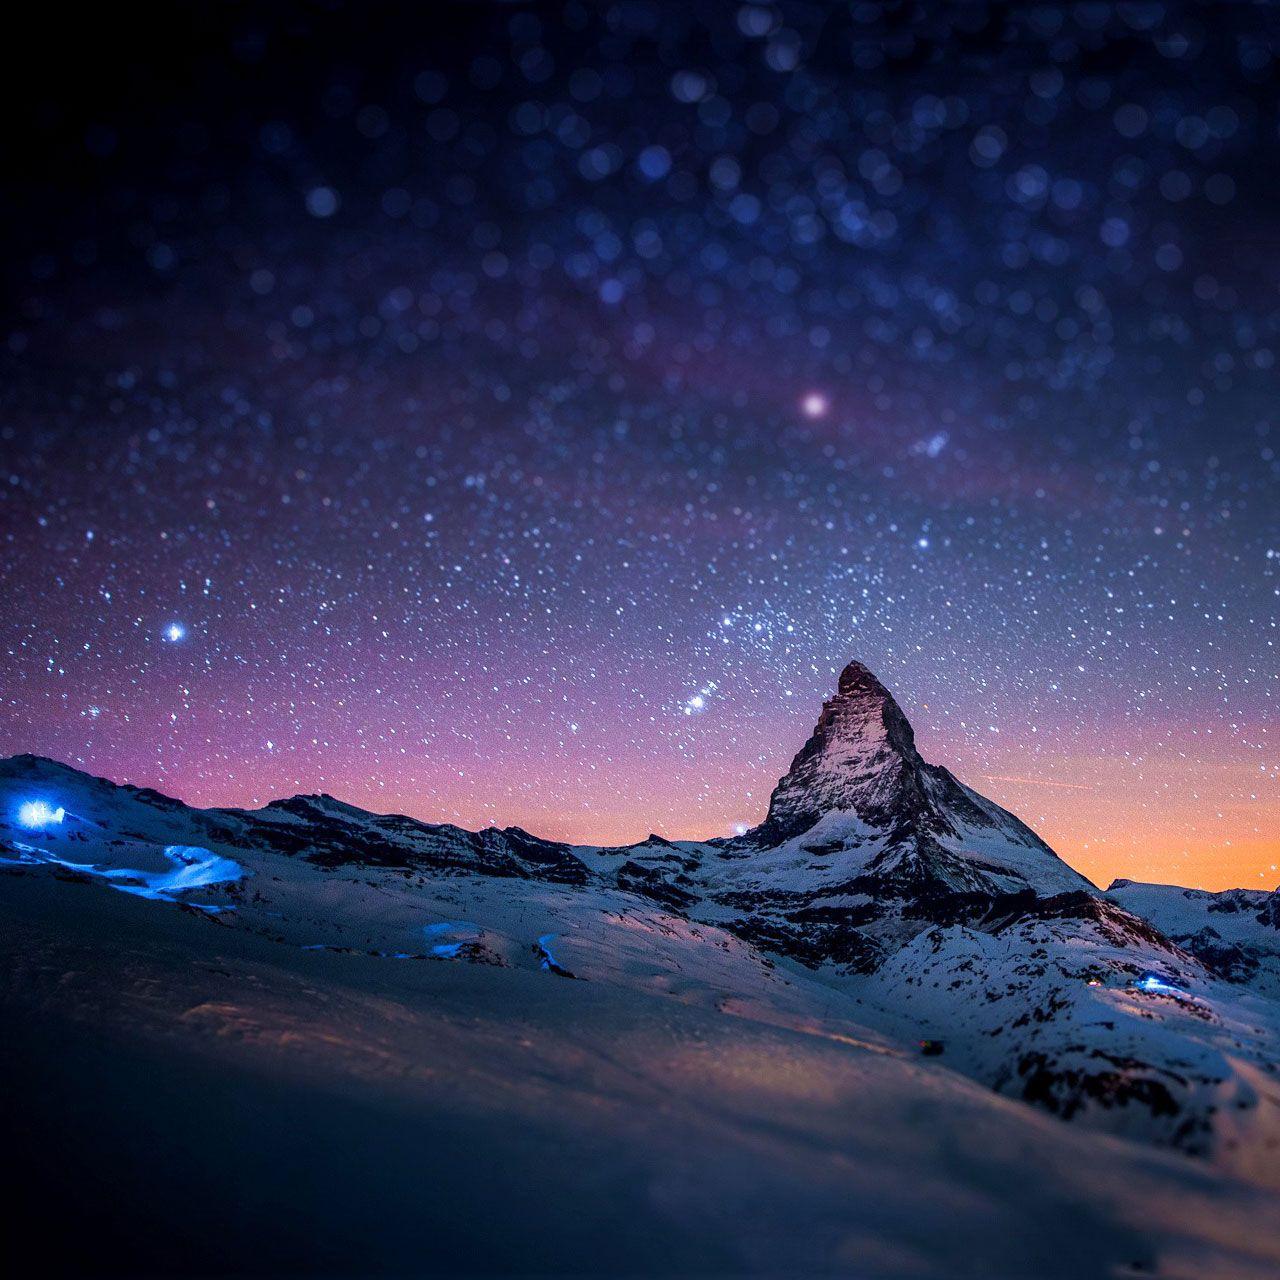 Stars And Snow Night In The Alps Samsung Galaxy Tab 10 wallpapers